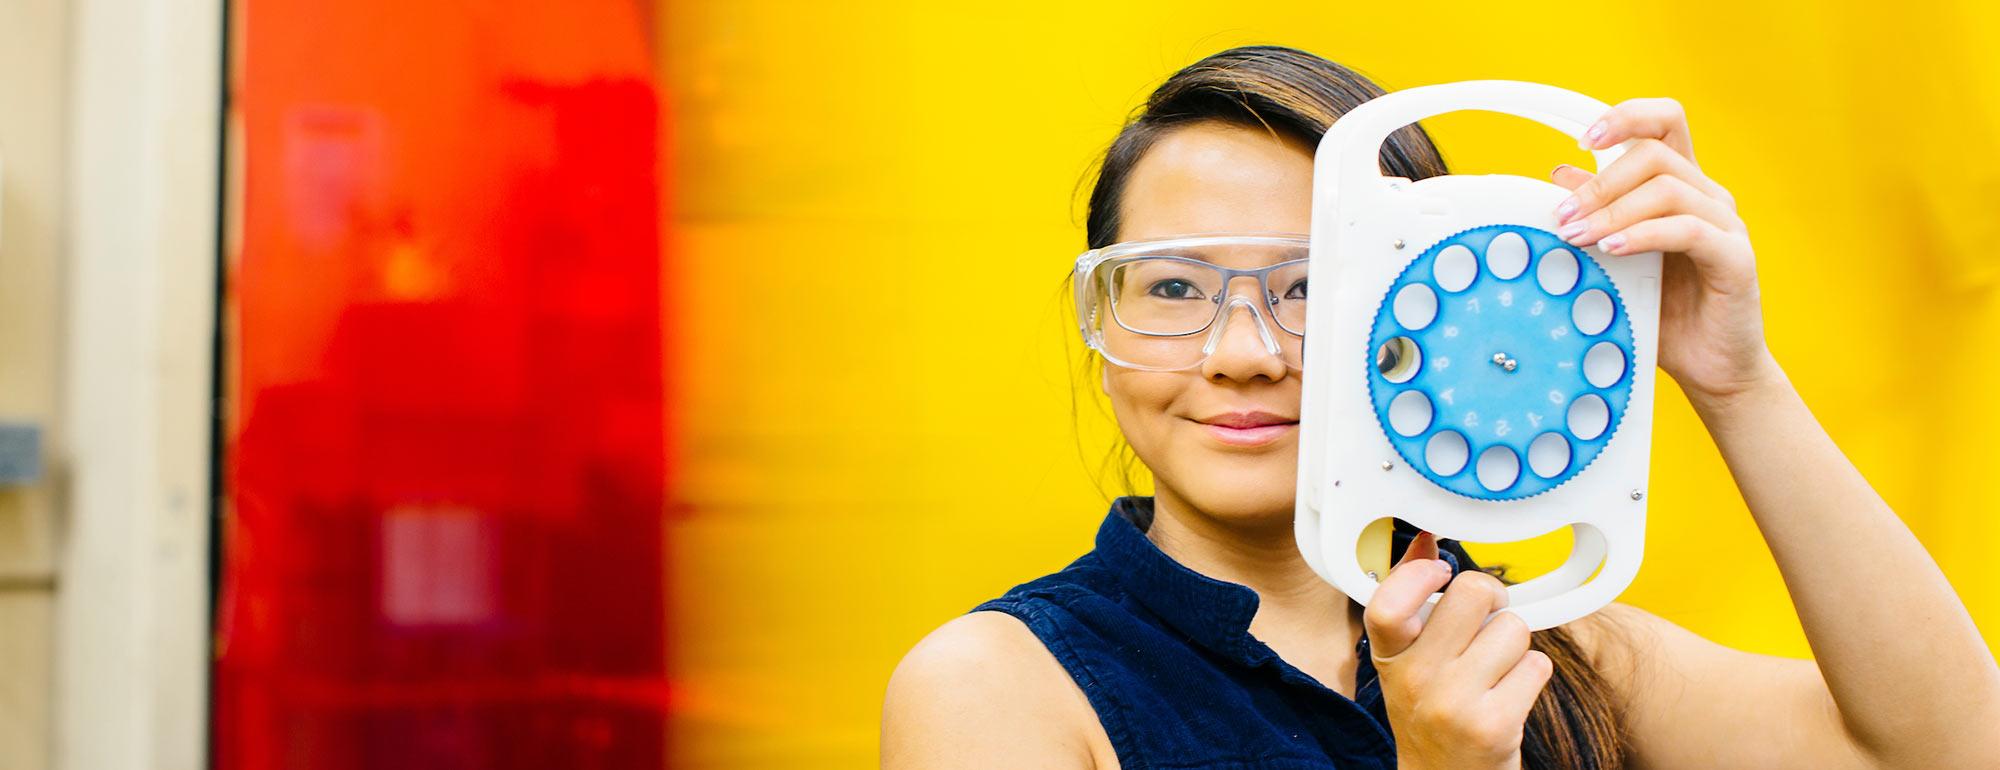 A student poses with her optomalogic invention